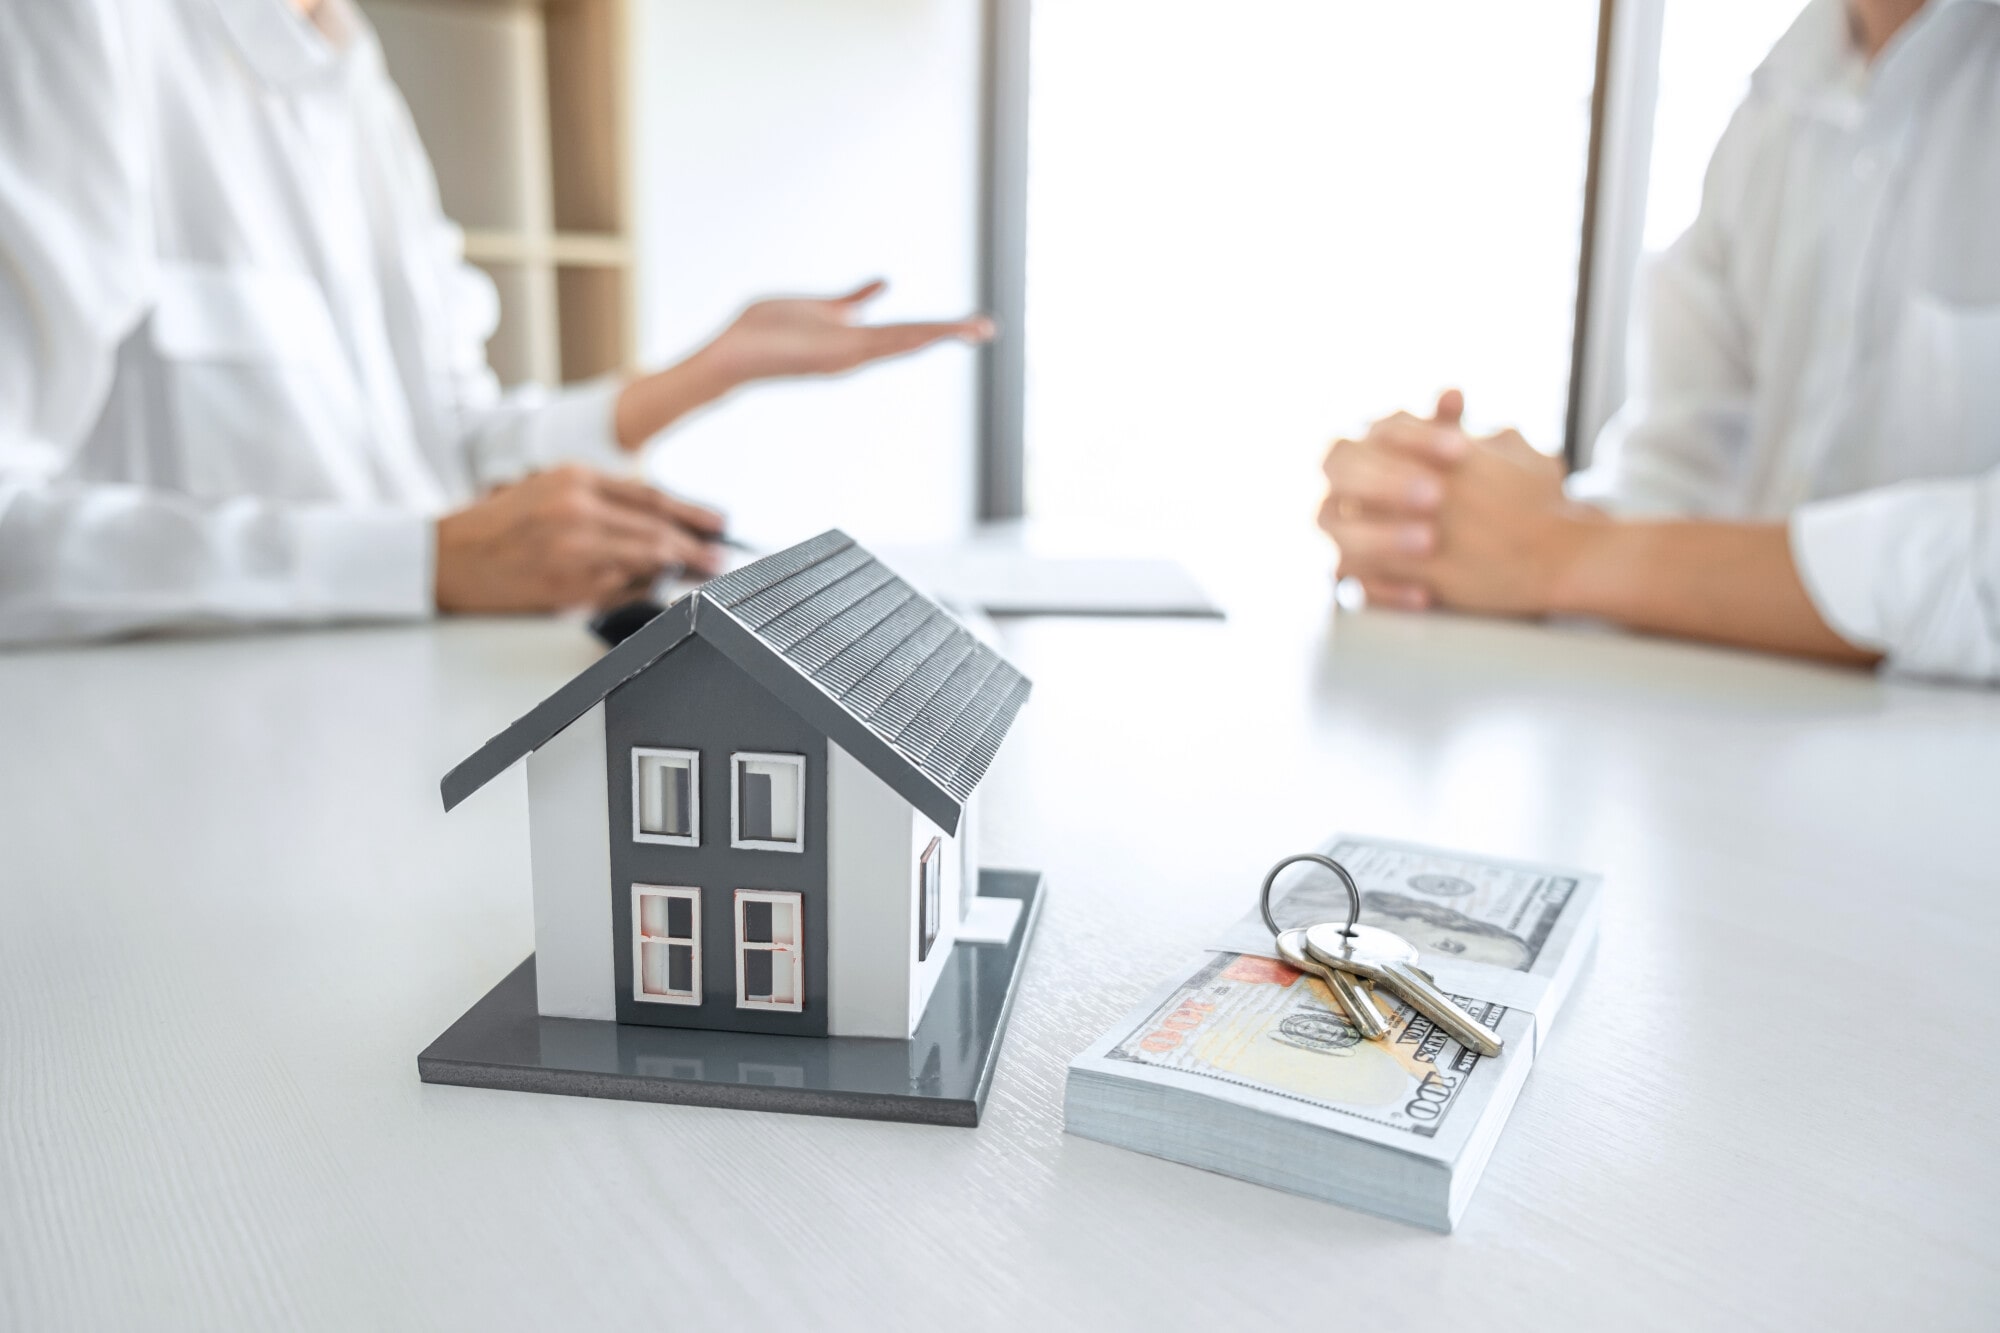 How Real Estate Services Can Help You Maximize Rental Property Income